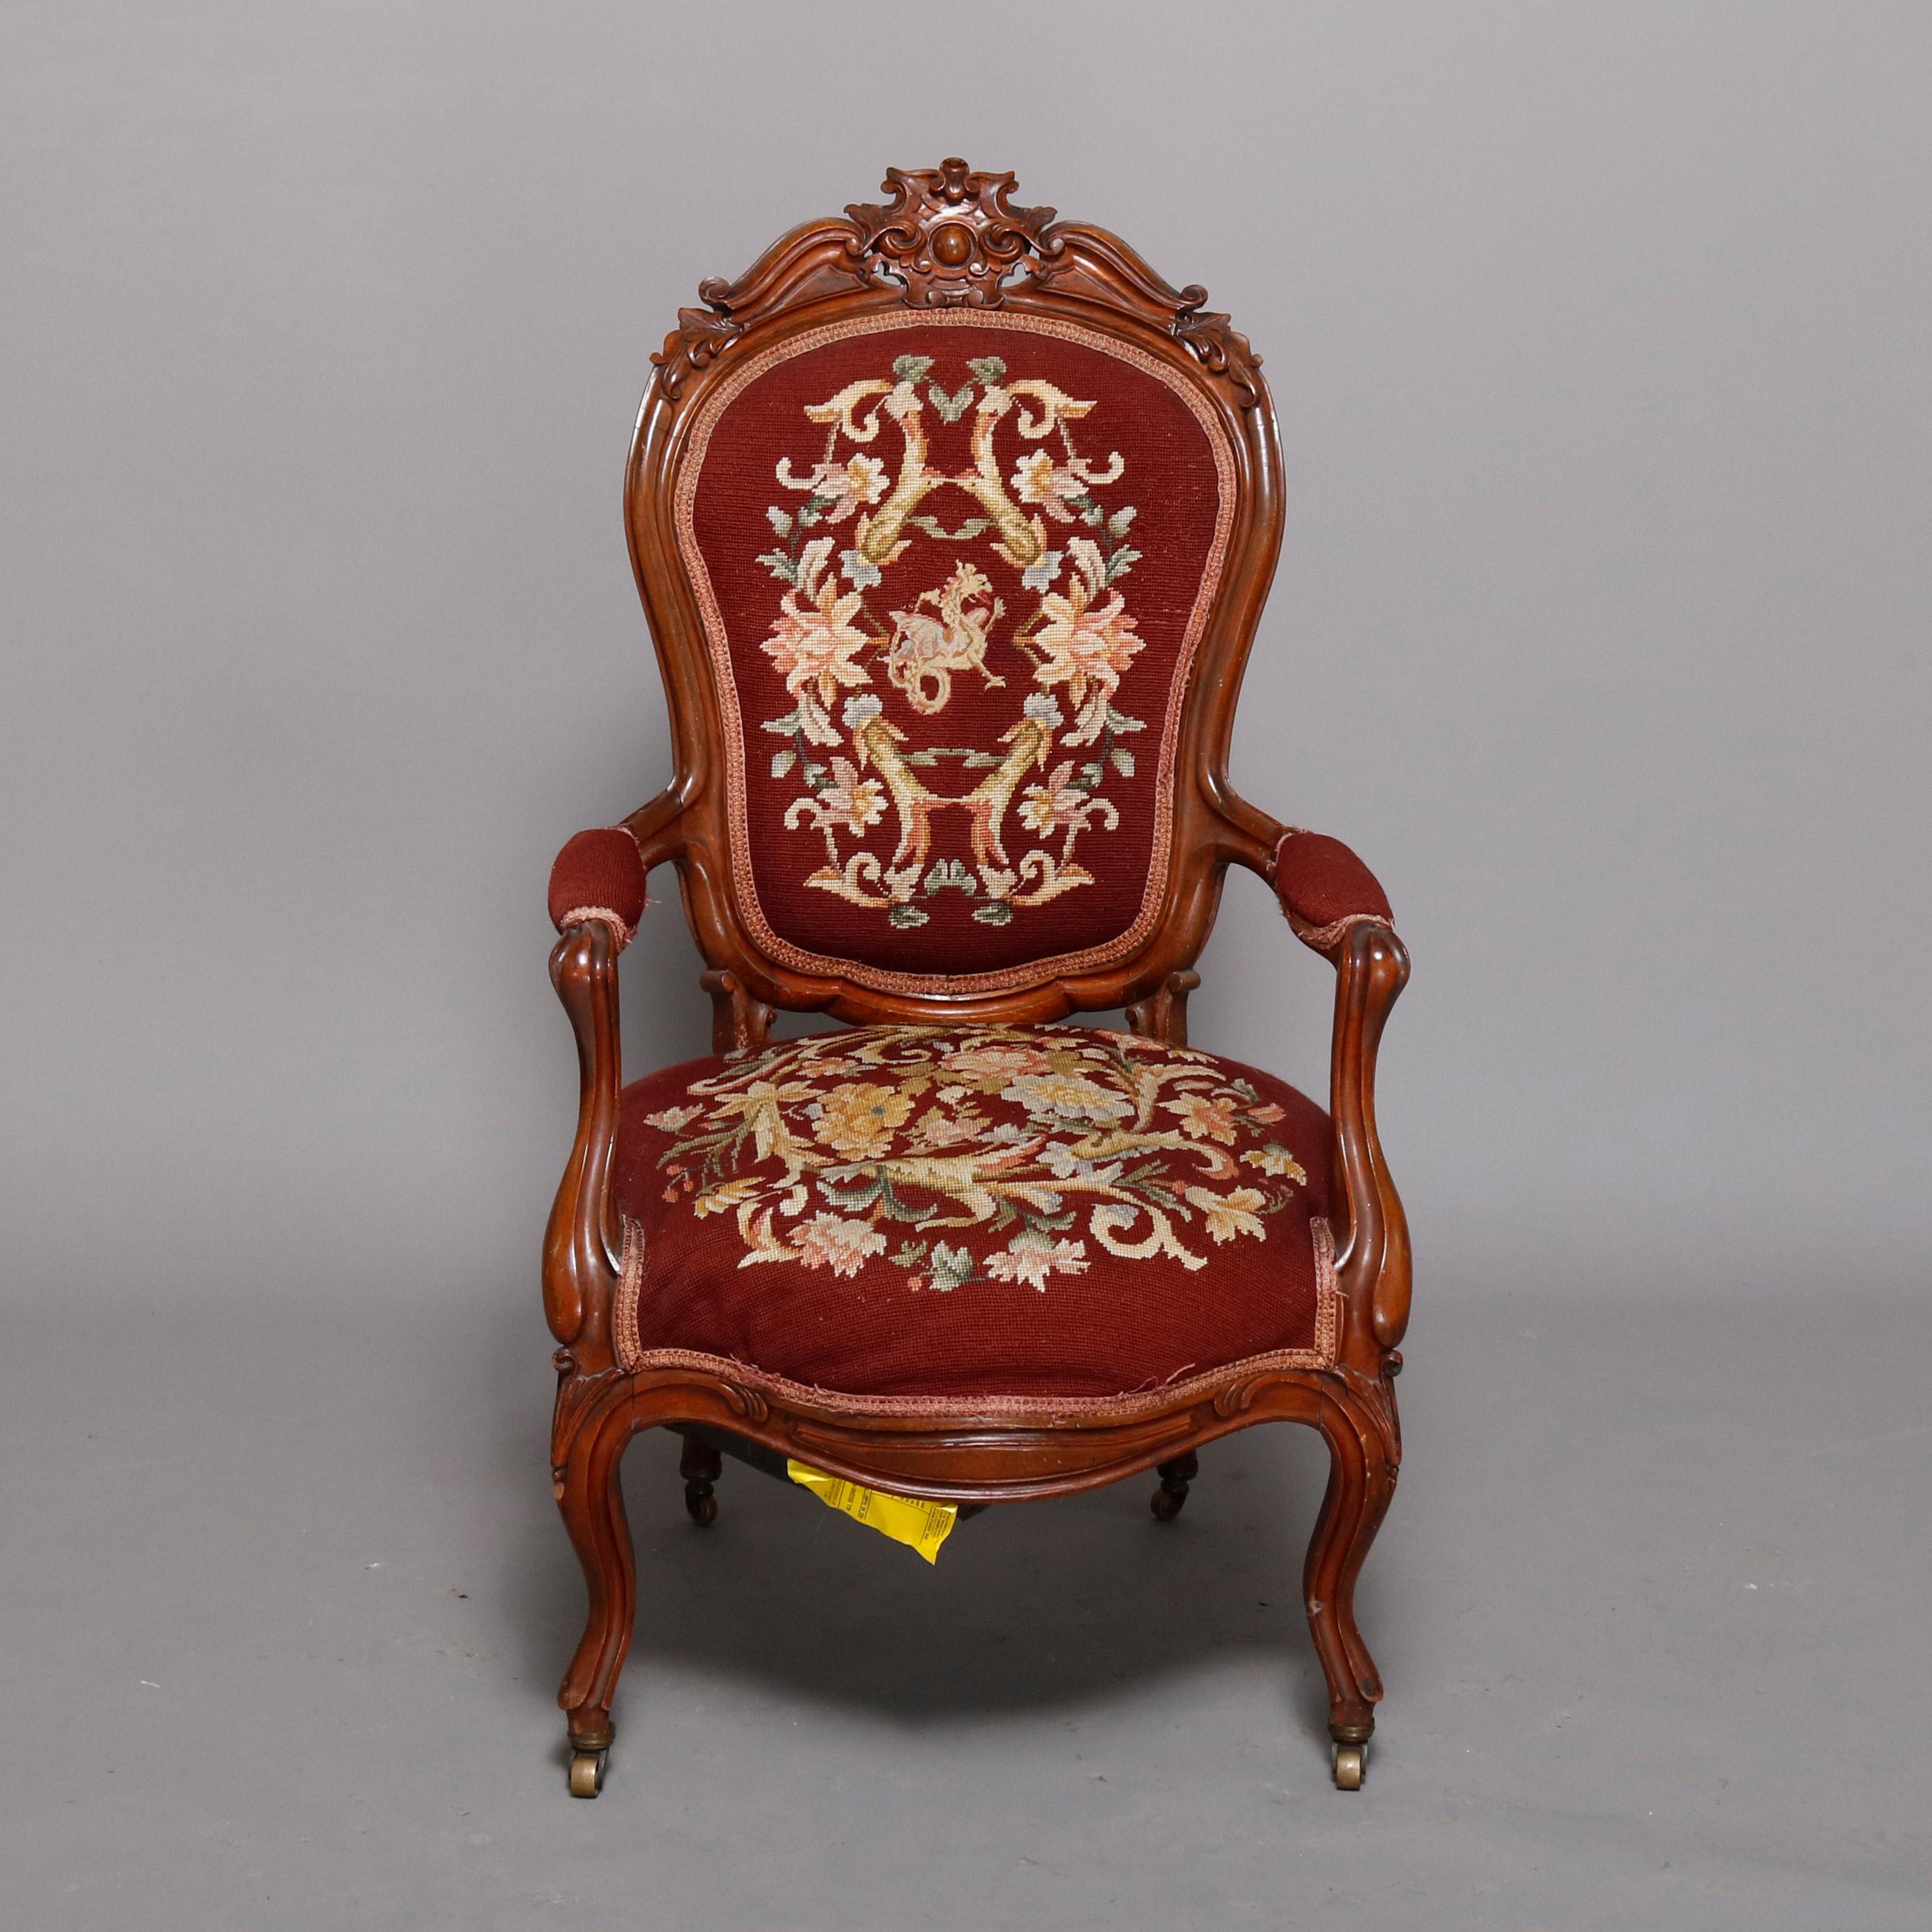 An antique Victorian gentleman's parlor armchair features rosewood frame with deeply carved scroll and foliate crest surmounting shield form back having floral needlepoint upholstery, covered arms and matching seat, raised on cabriole legs, circa